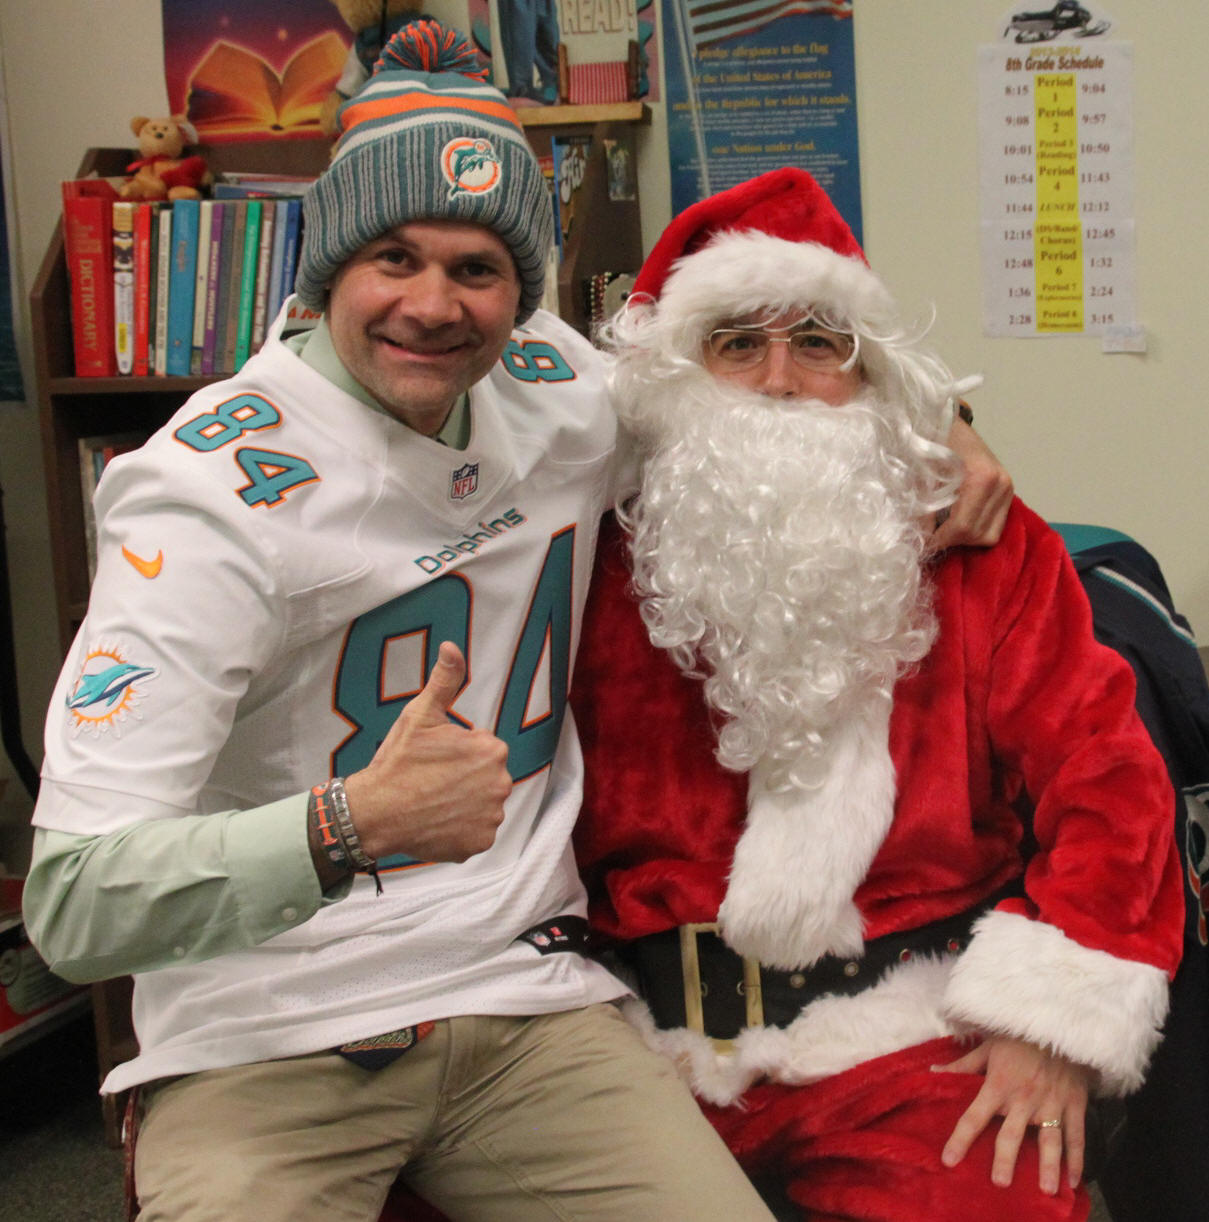 I got to tell Santa how great the Dolphins are in 2013!